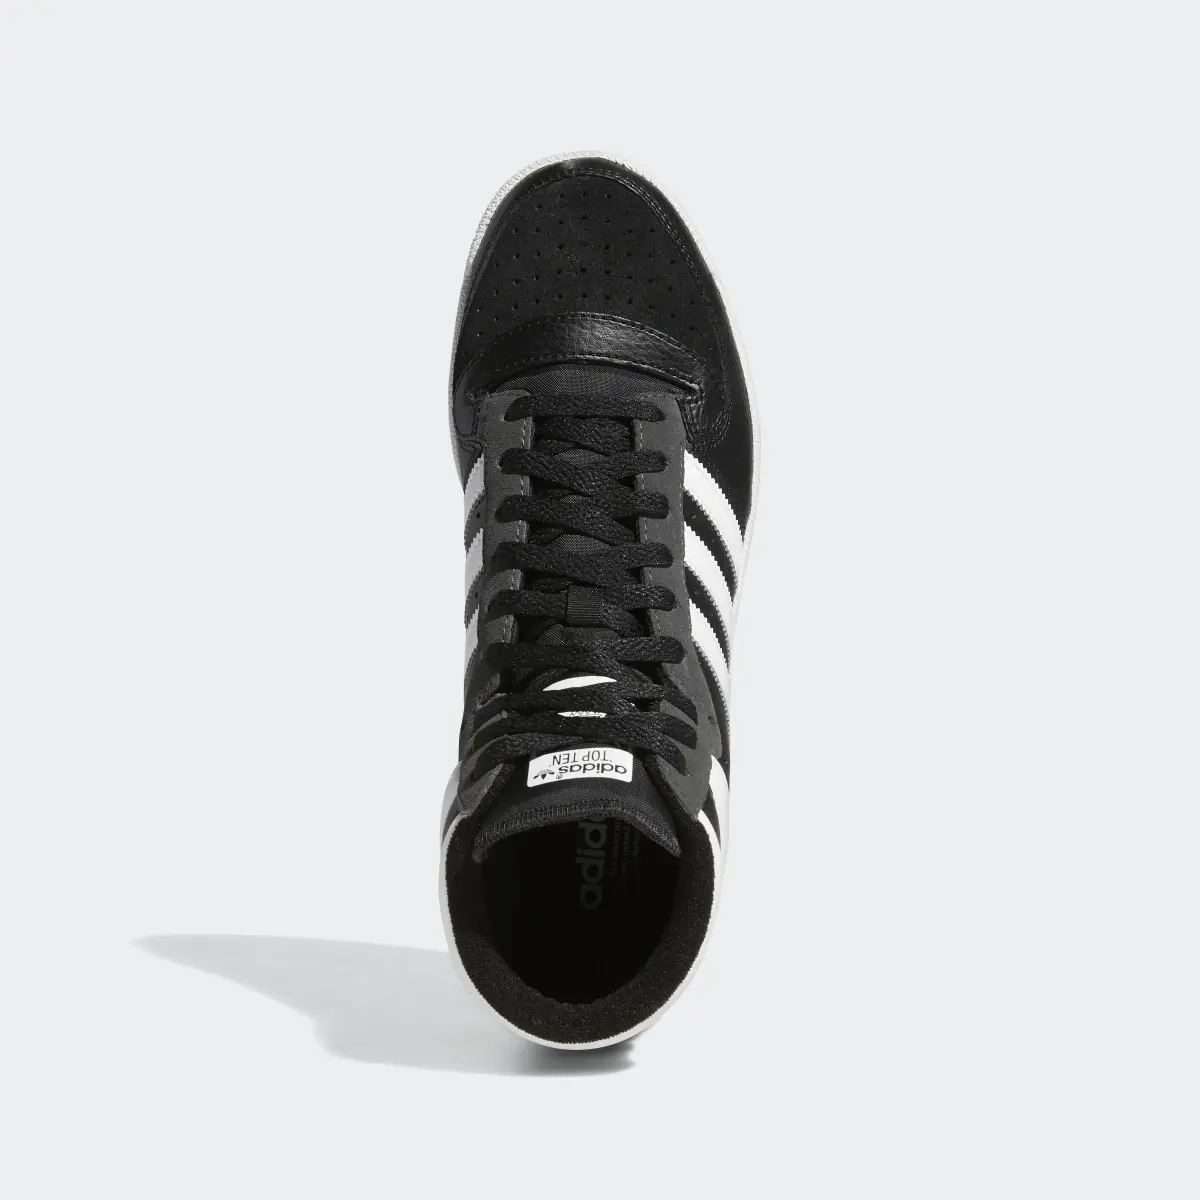 Adidas Top Ten RB Shoes. 3